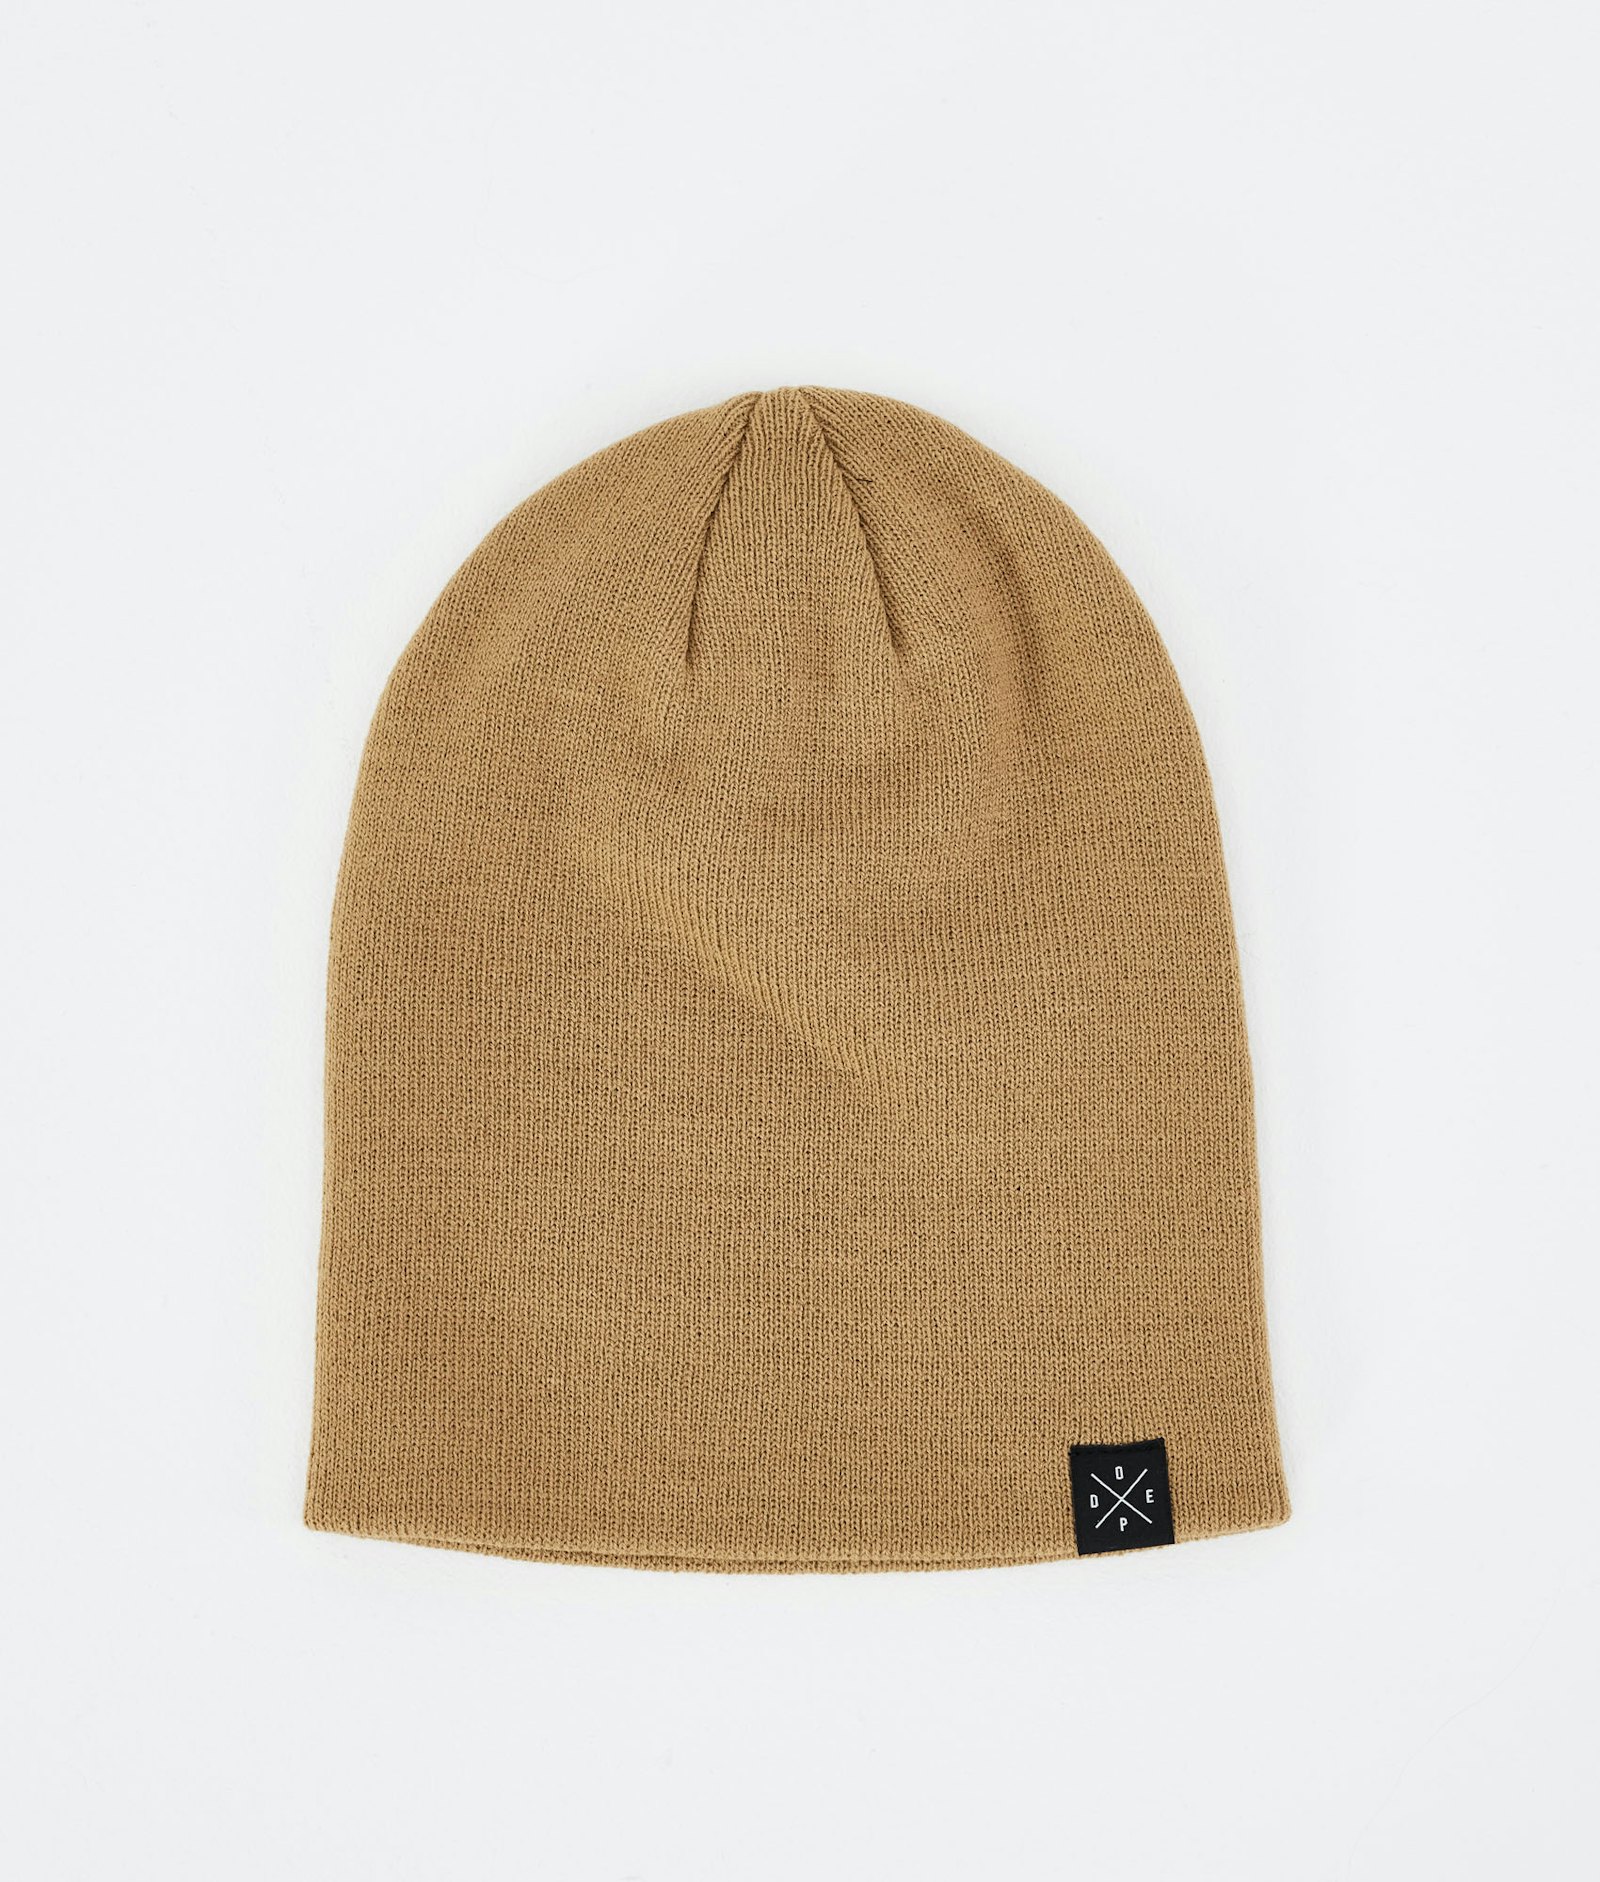 Dope Solitude 2021 Beanie Gold, Image 2 of 4